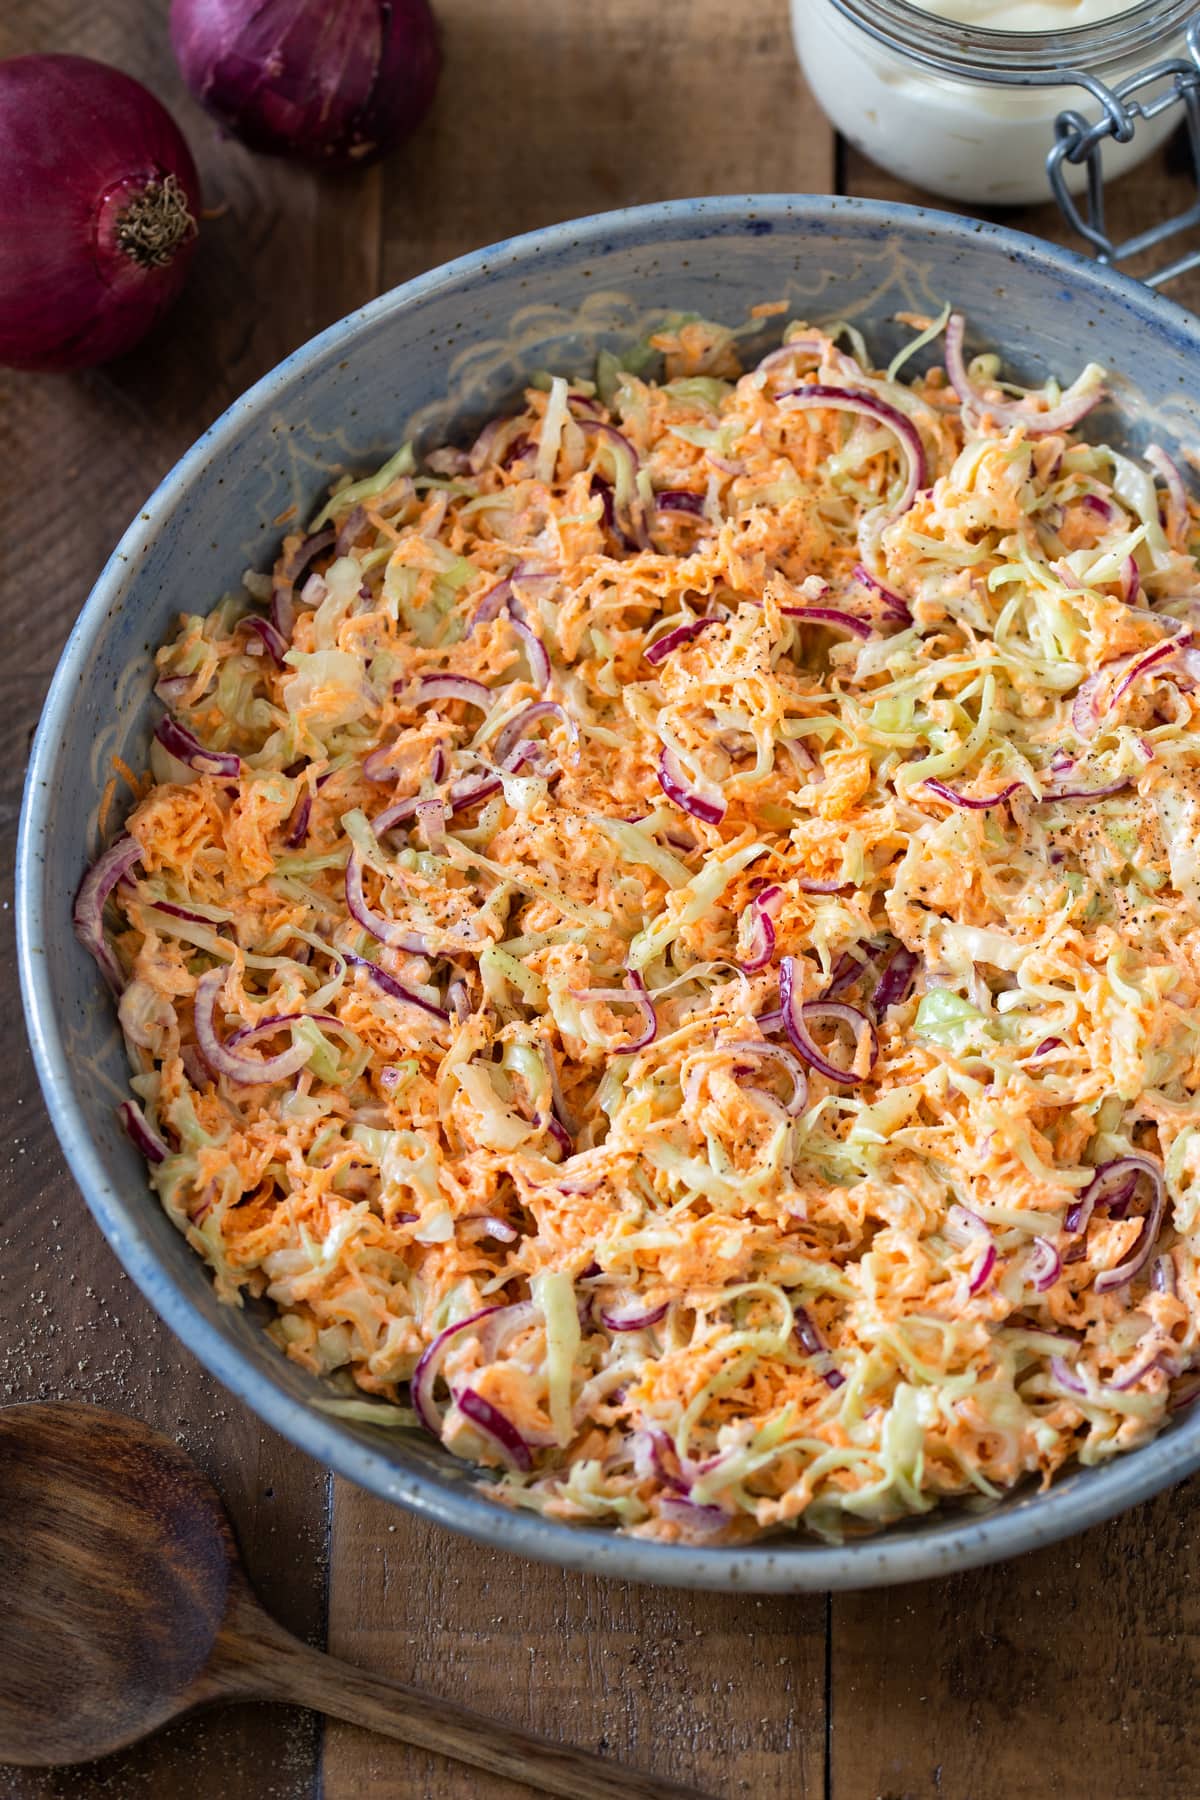 Best coleslaw made with sweet pickled veggies.